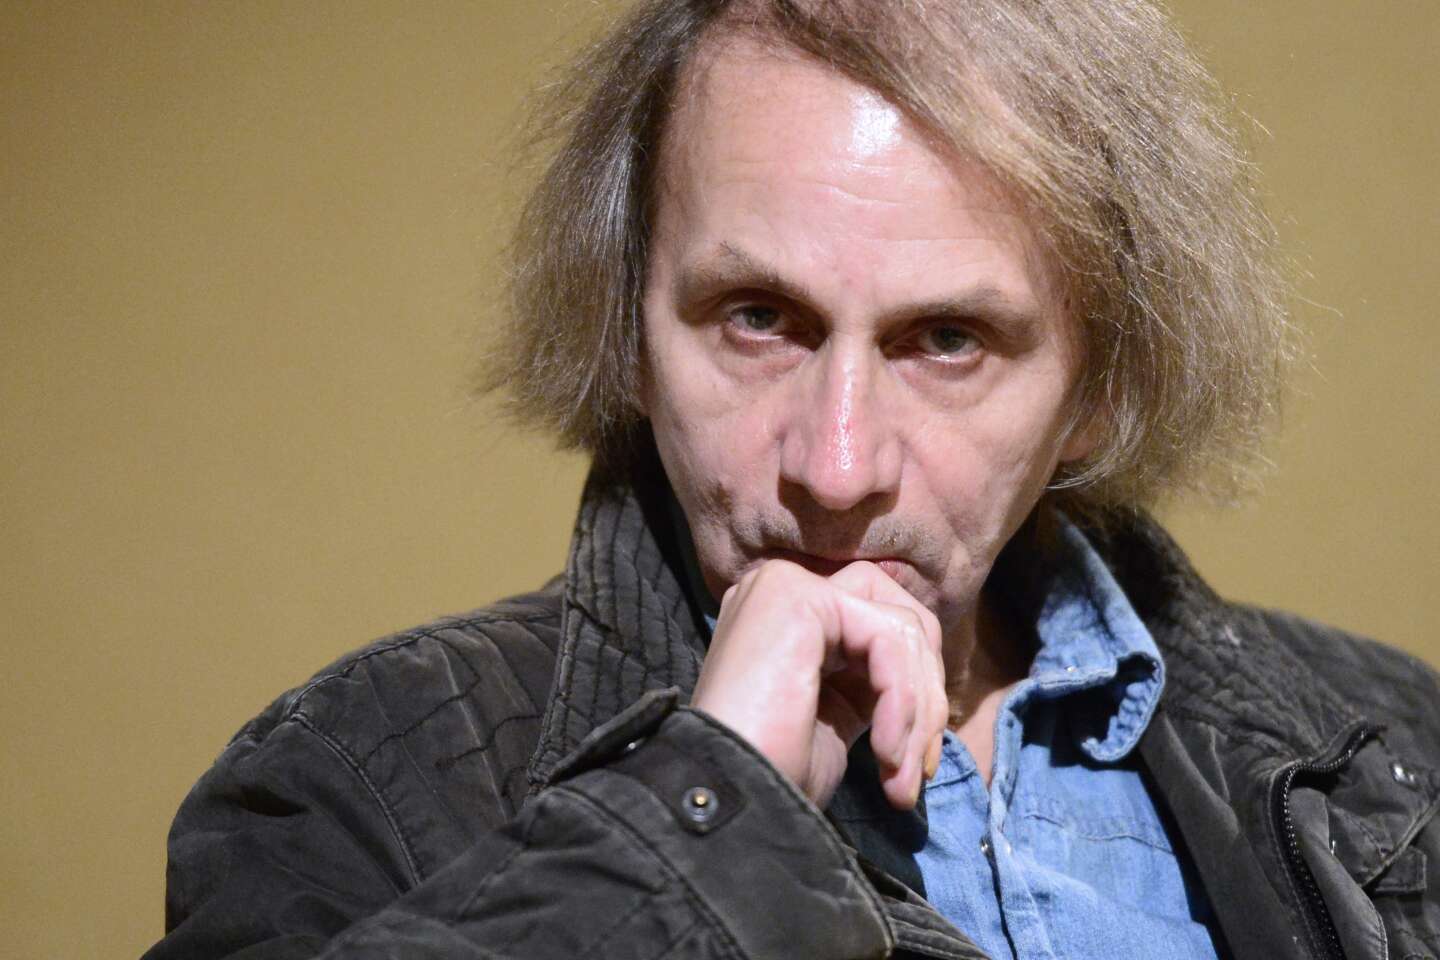 Michel Houellebecq’s request to prevent the broadcast of a film with pornographic content rejected